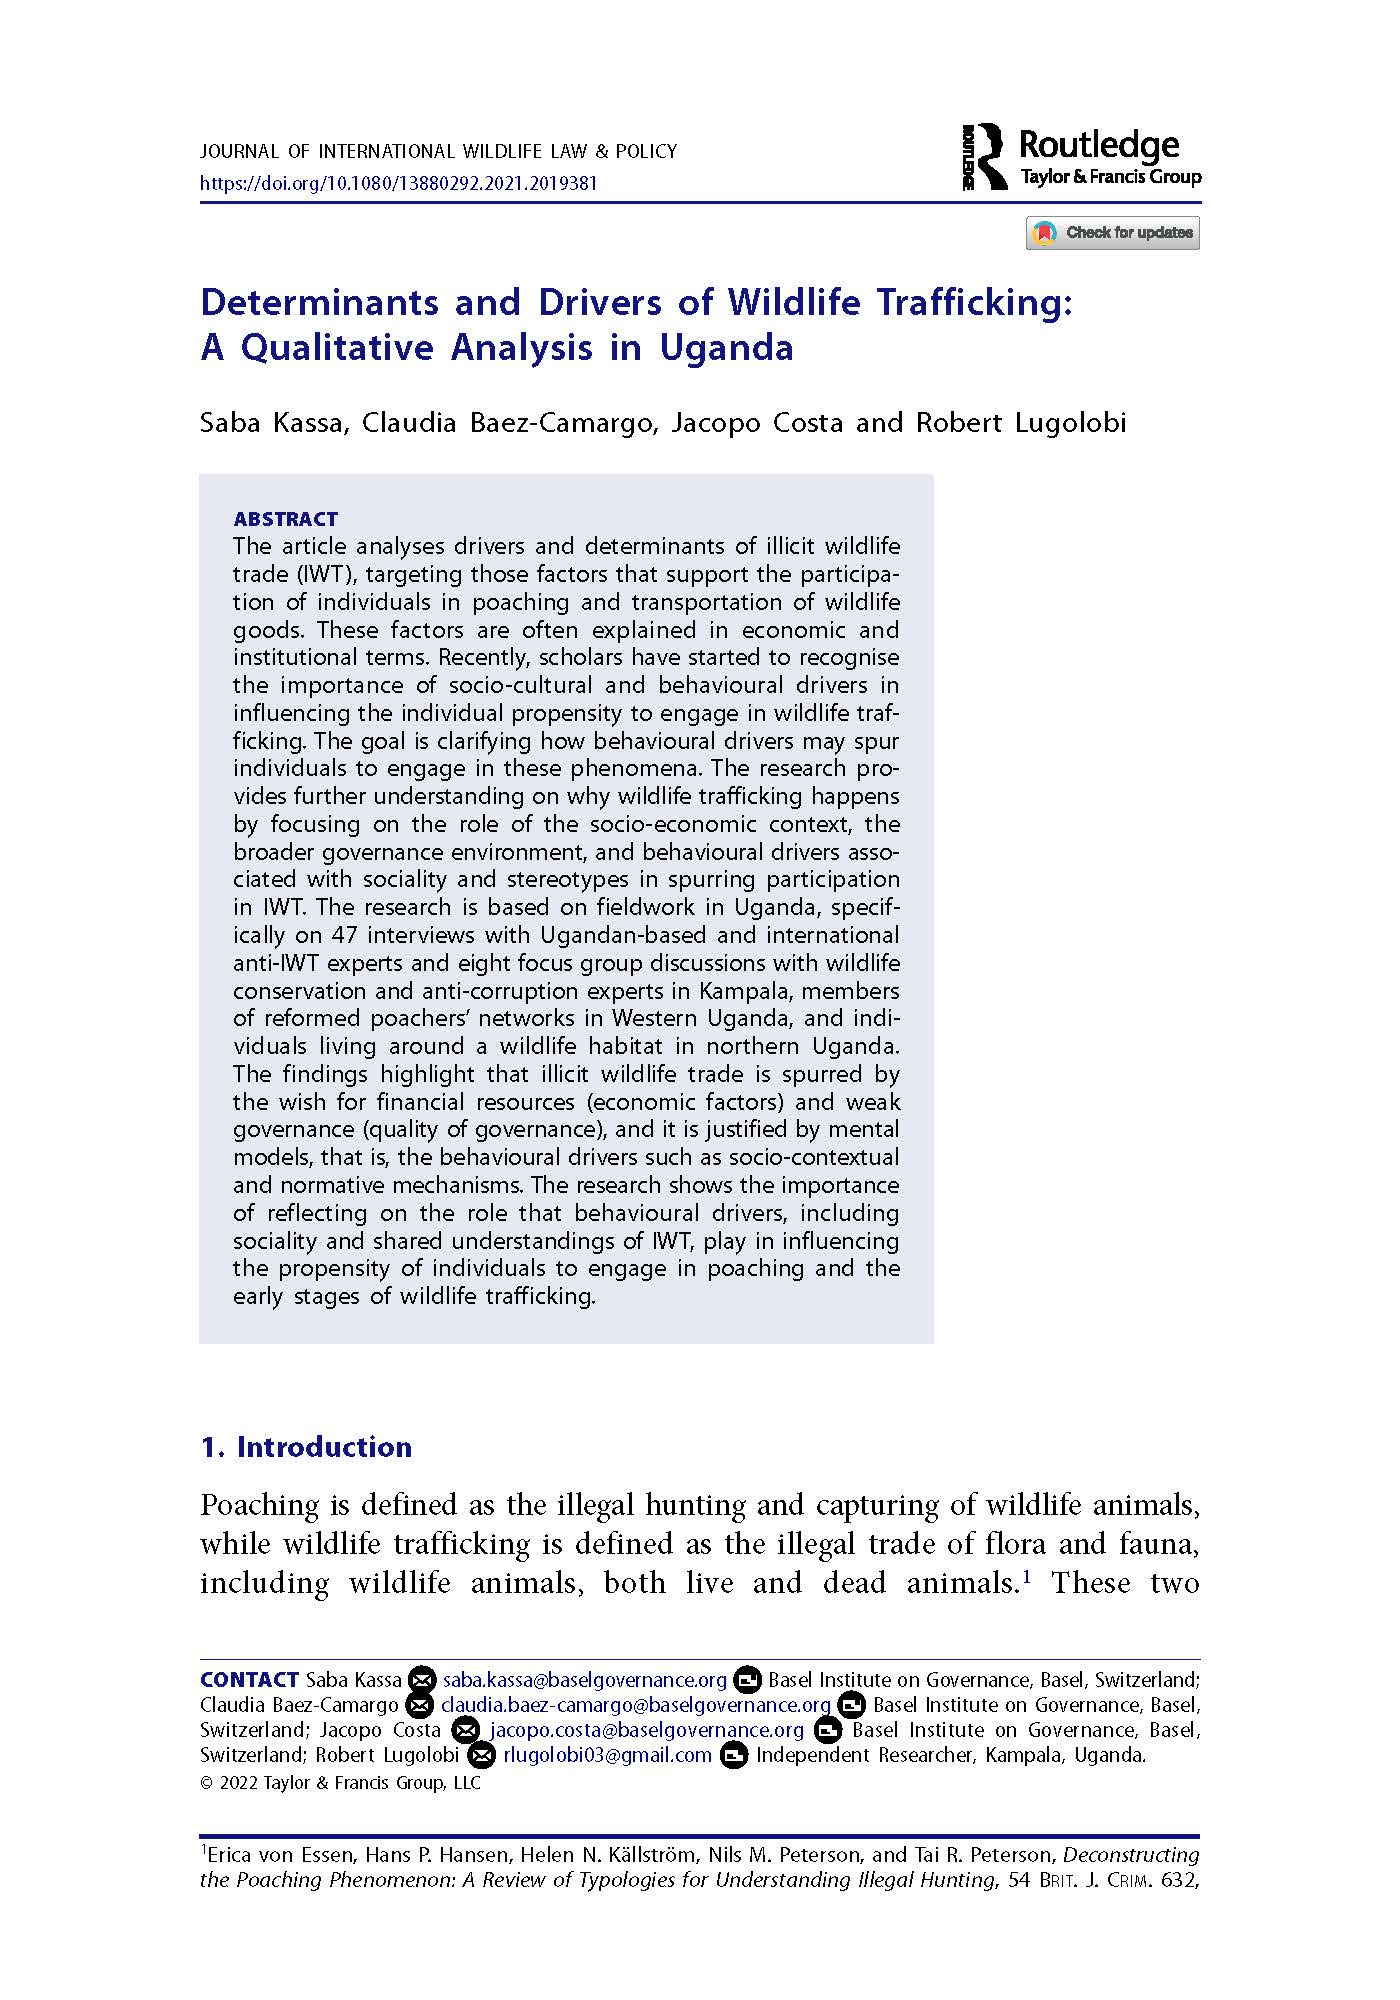 Cover page of Determinants and Drivers of Wildlife Trafficking A Qualitative Analysis in Uganda.jpg